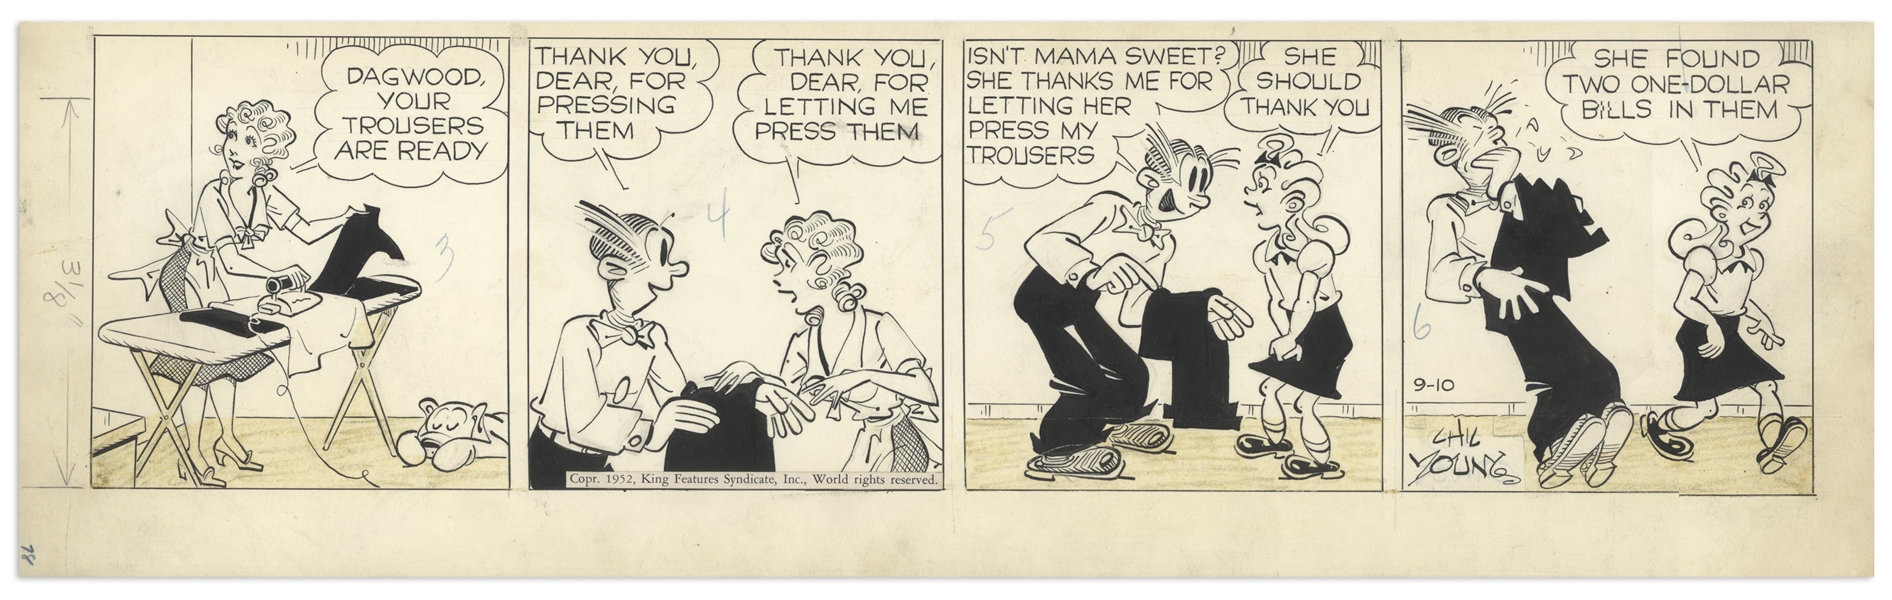 Chic Young Hand-Drawn ''Blondie'' Comic Strip From 1952 Titled ''Service With a Smile''